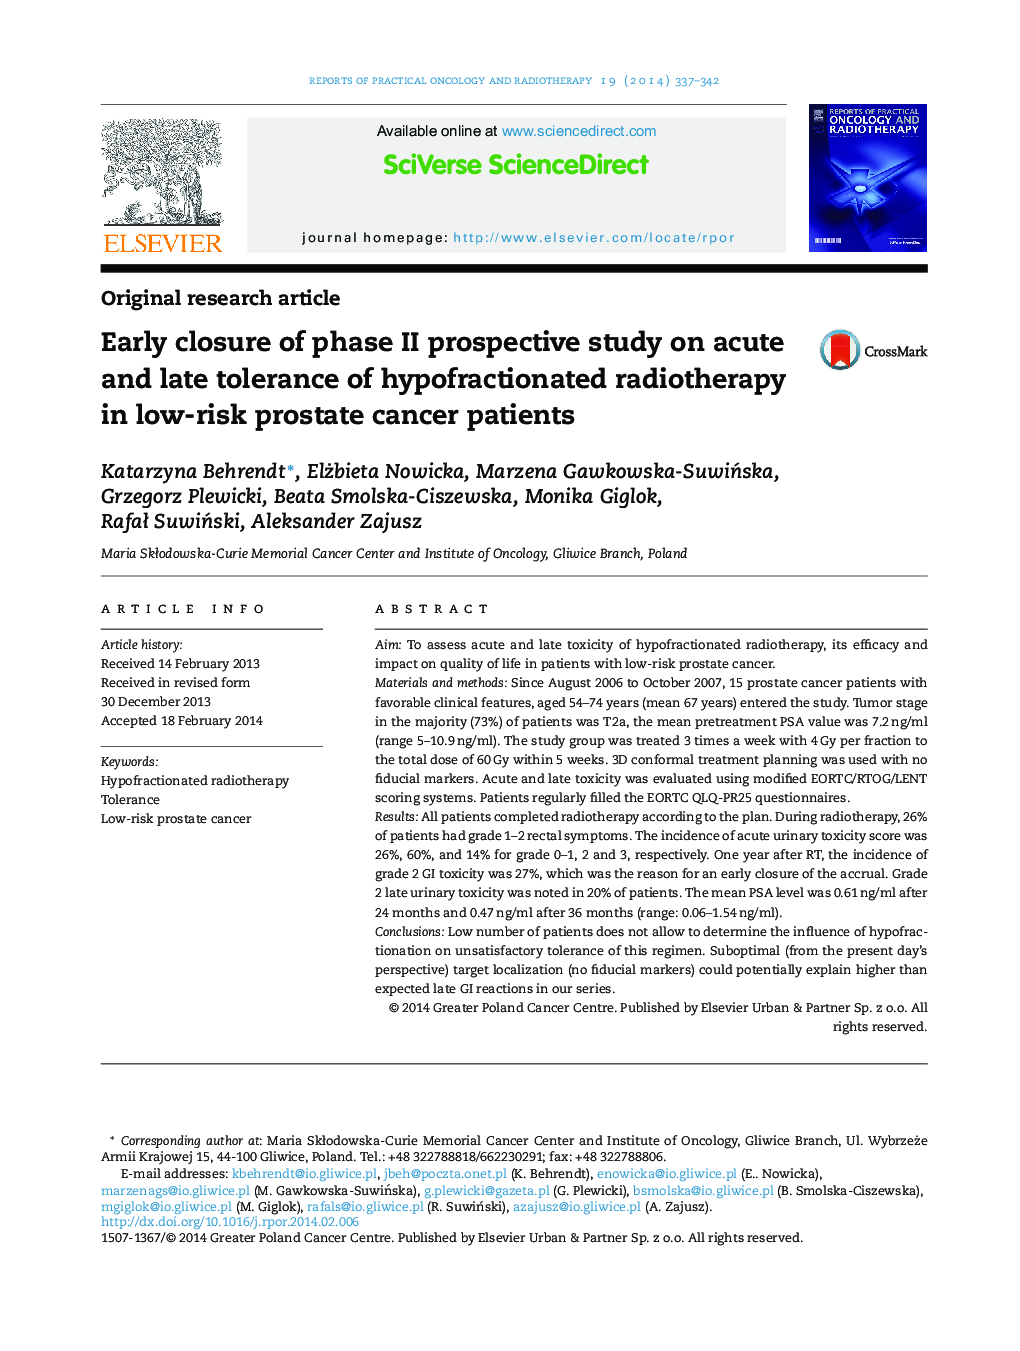 Early closure of phase II prospective study on acute and late tolerance of hypofractionated radiotherapy in low-risk prostate cancer patients